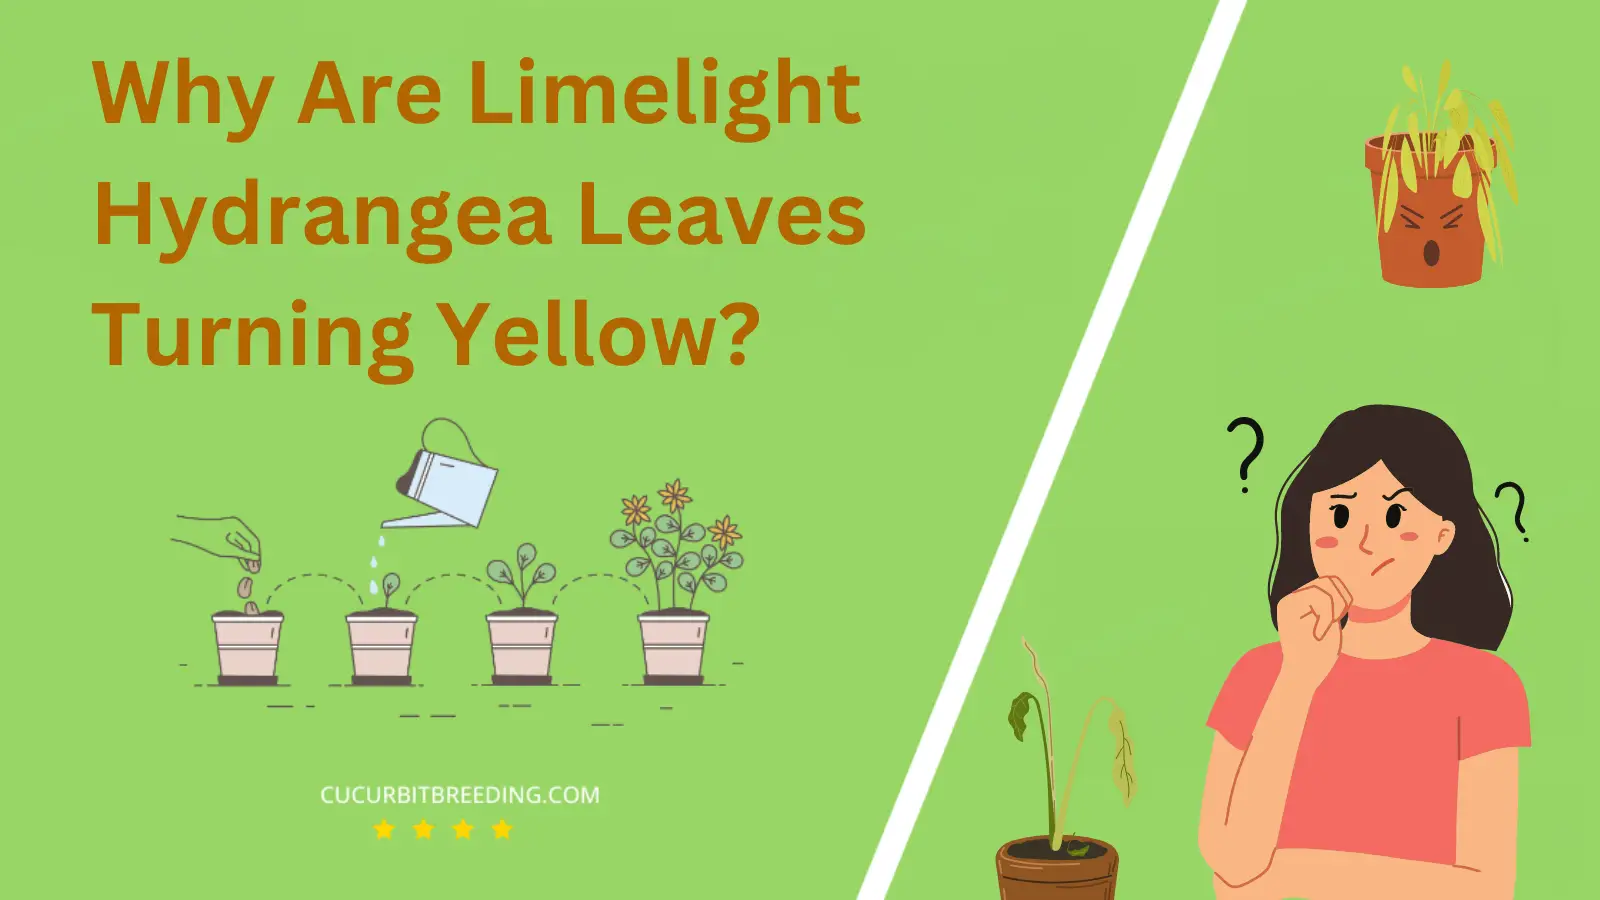 Why Are Limelight Hydrangea Leaves Turning Yellow